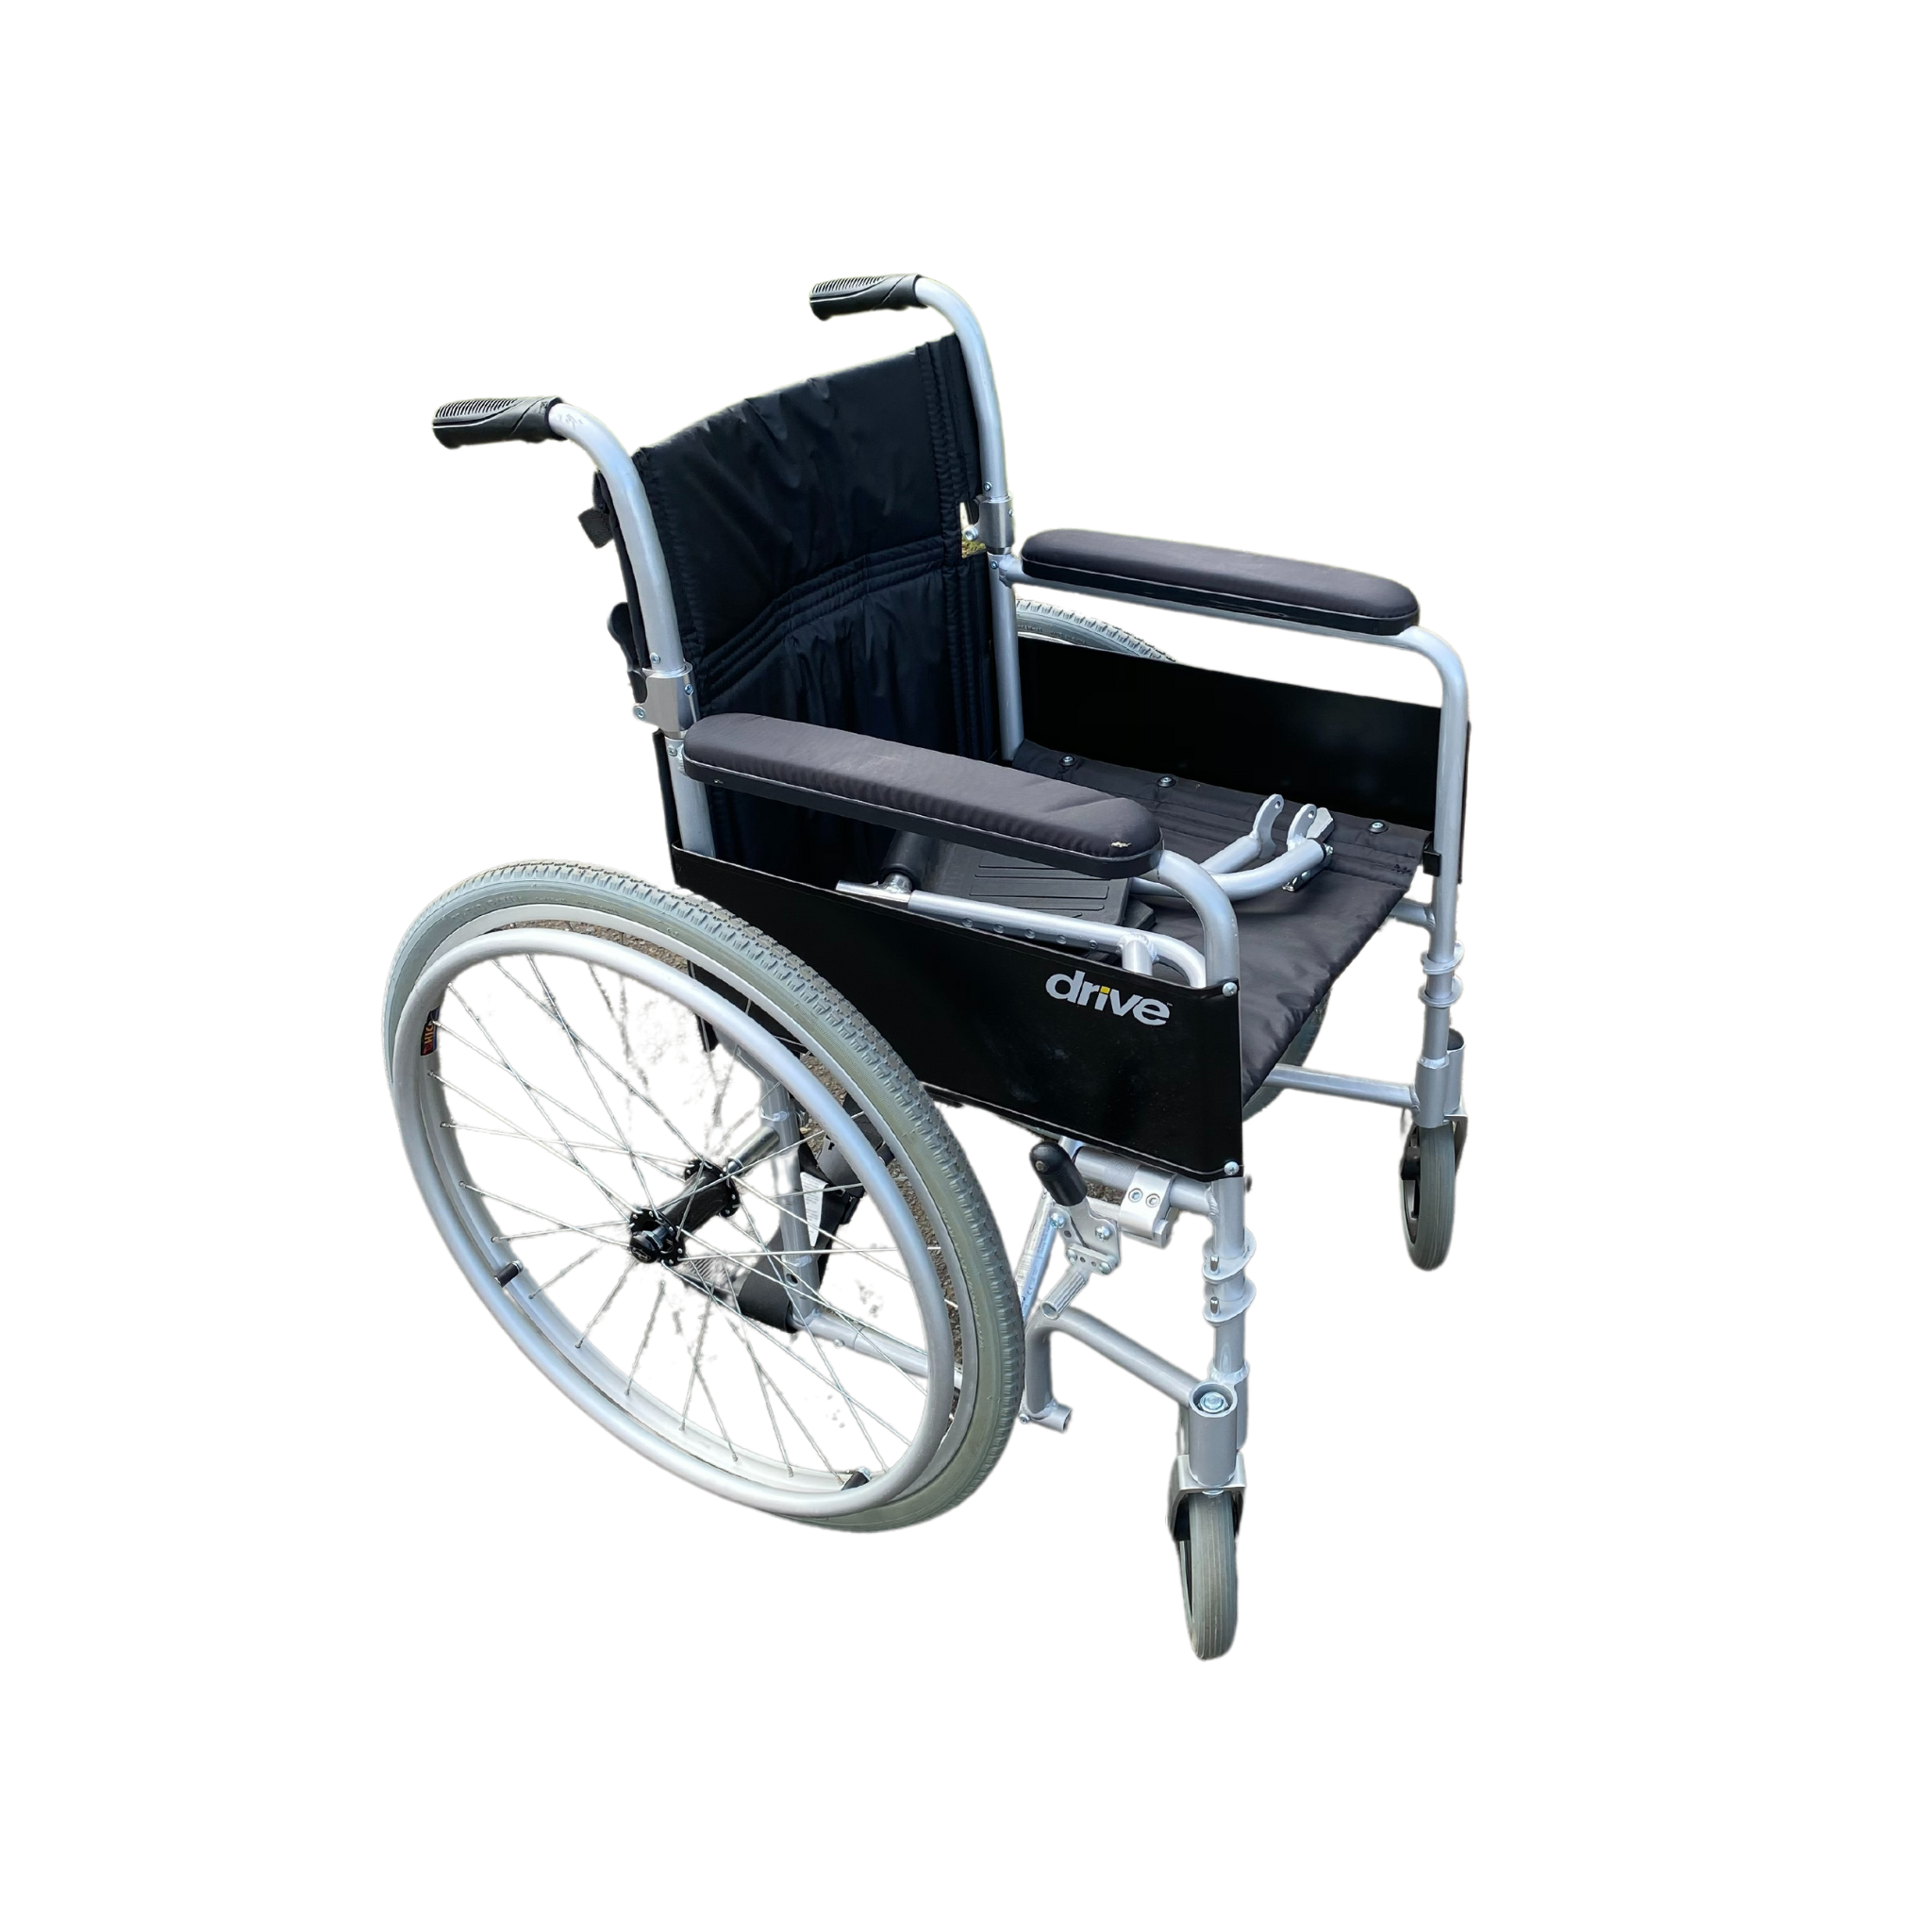 Rental - Drive Self-Propel 16" Wheelchair from Aged Care and Medical - Wheelchair for Hire for aged care 